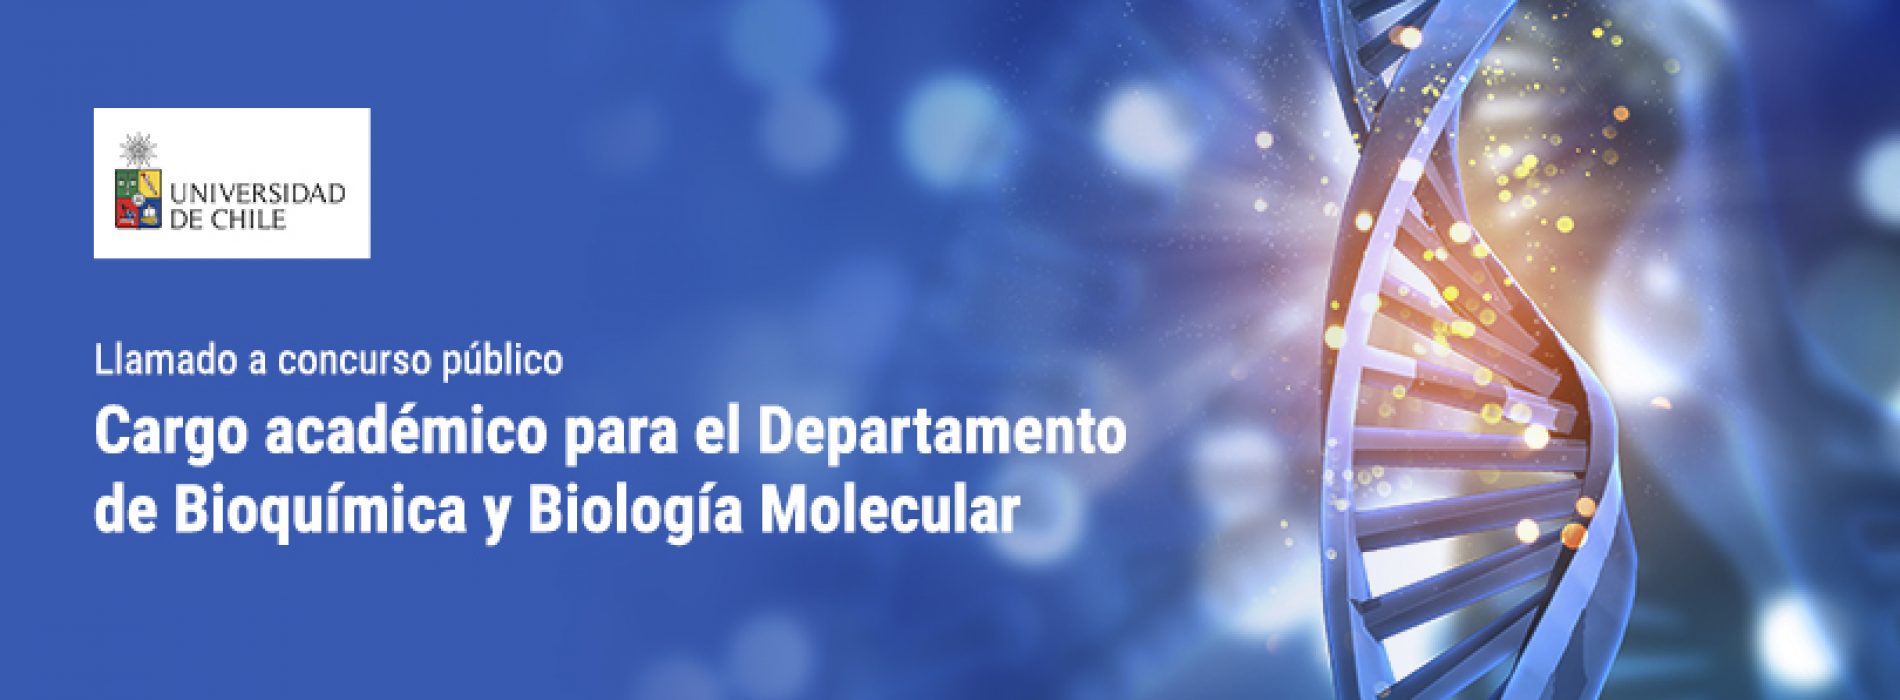 Call for Public Competition for academic position for the Department of Biochemistry and Molecular Biology